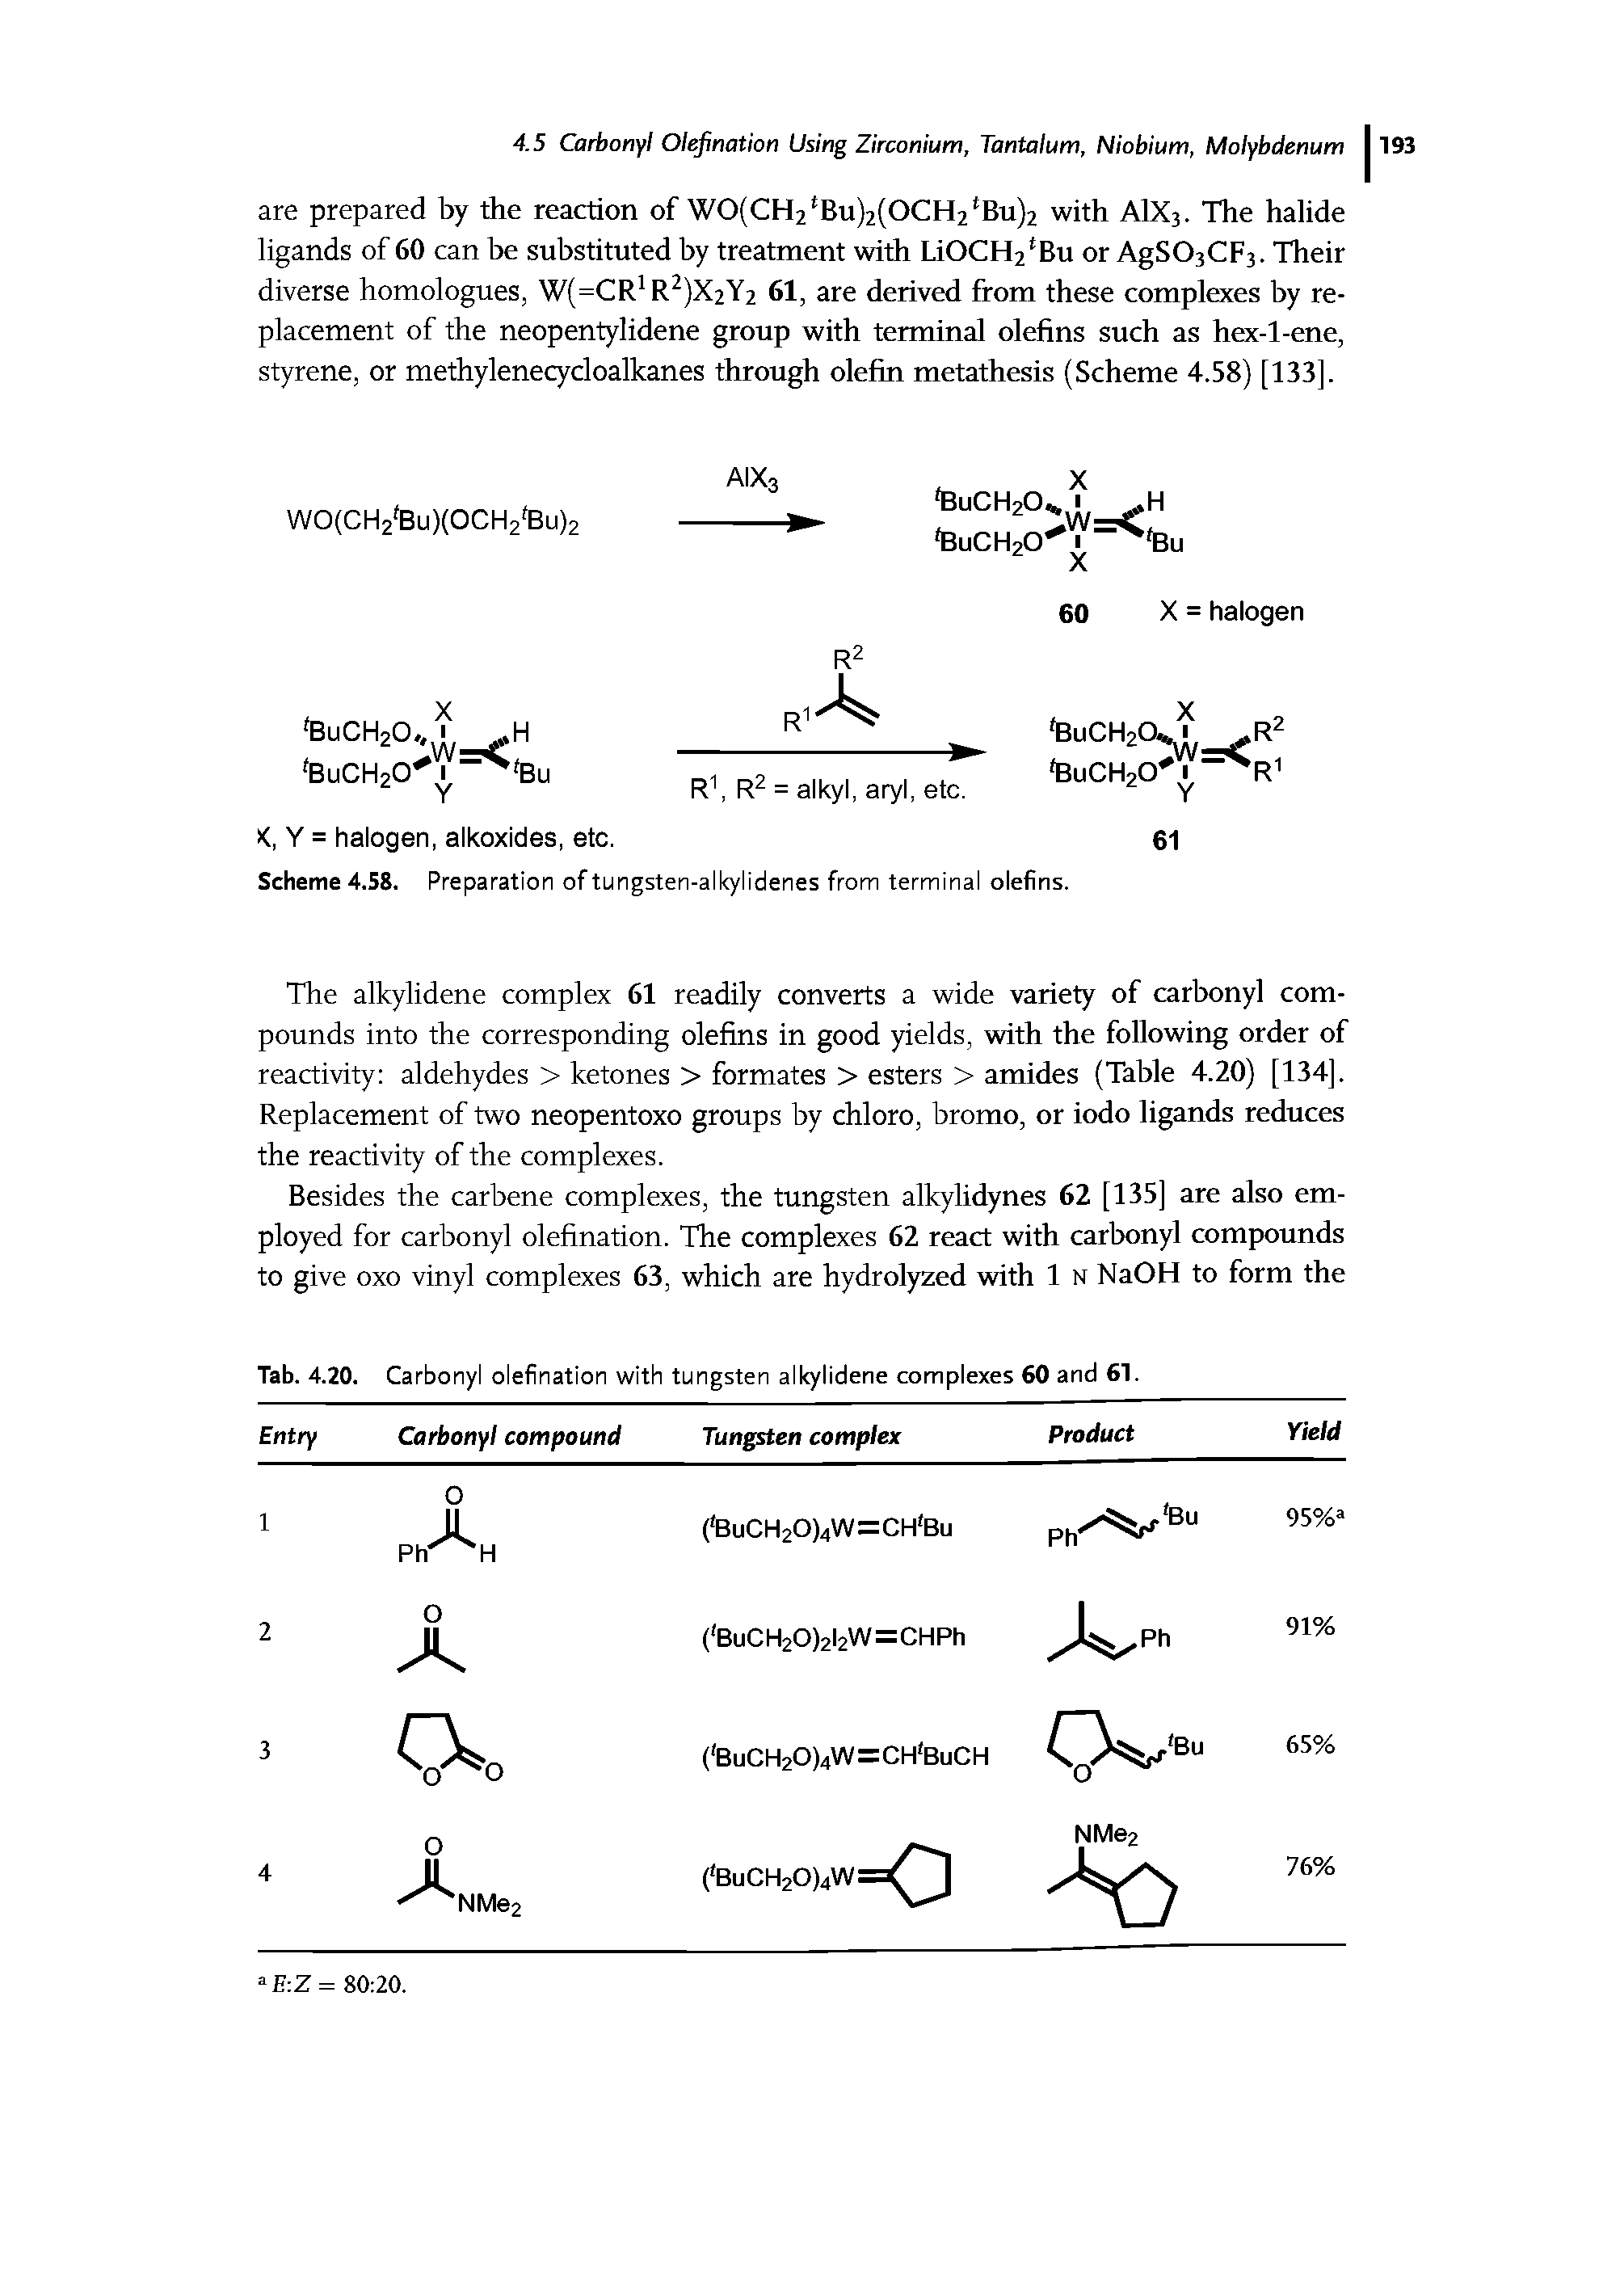 Tab. 4.20. Carbonyl olefination with tungsten alkylidene complexes 60 and 61.